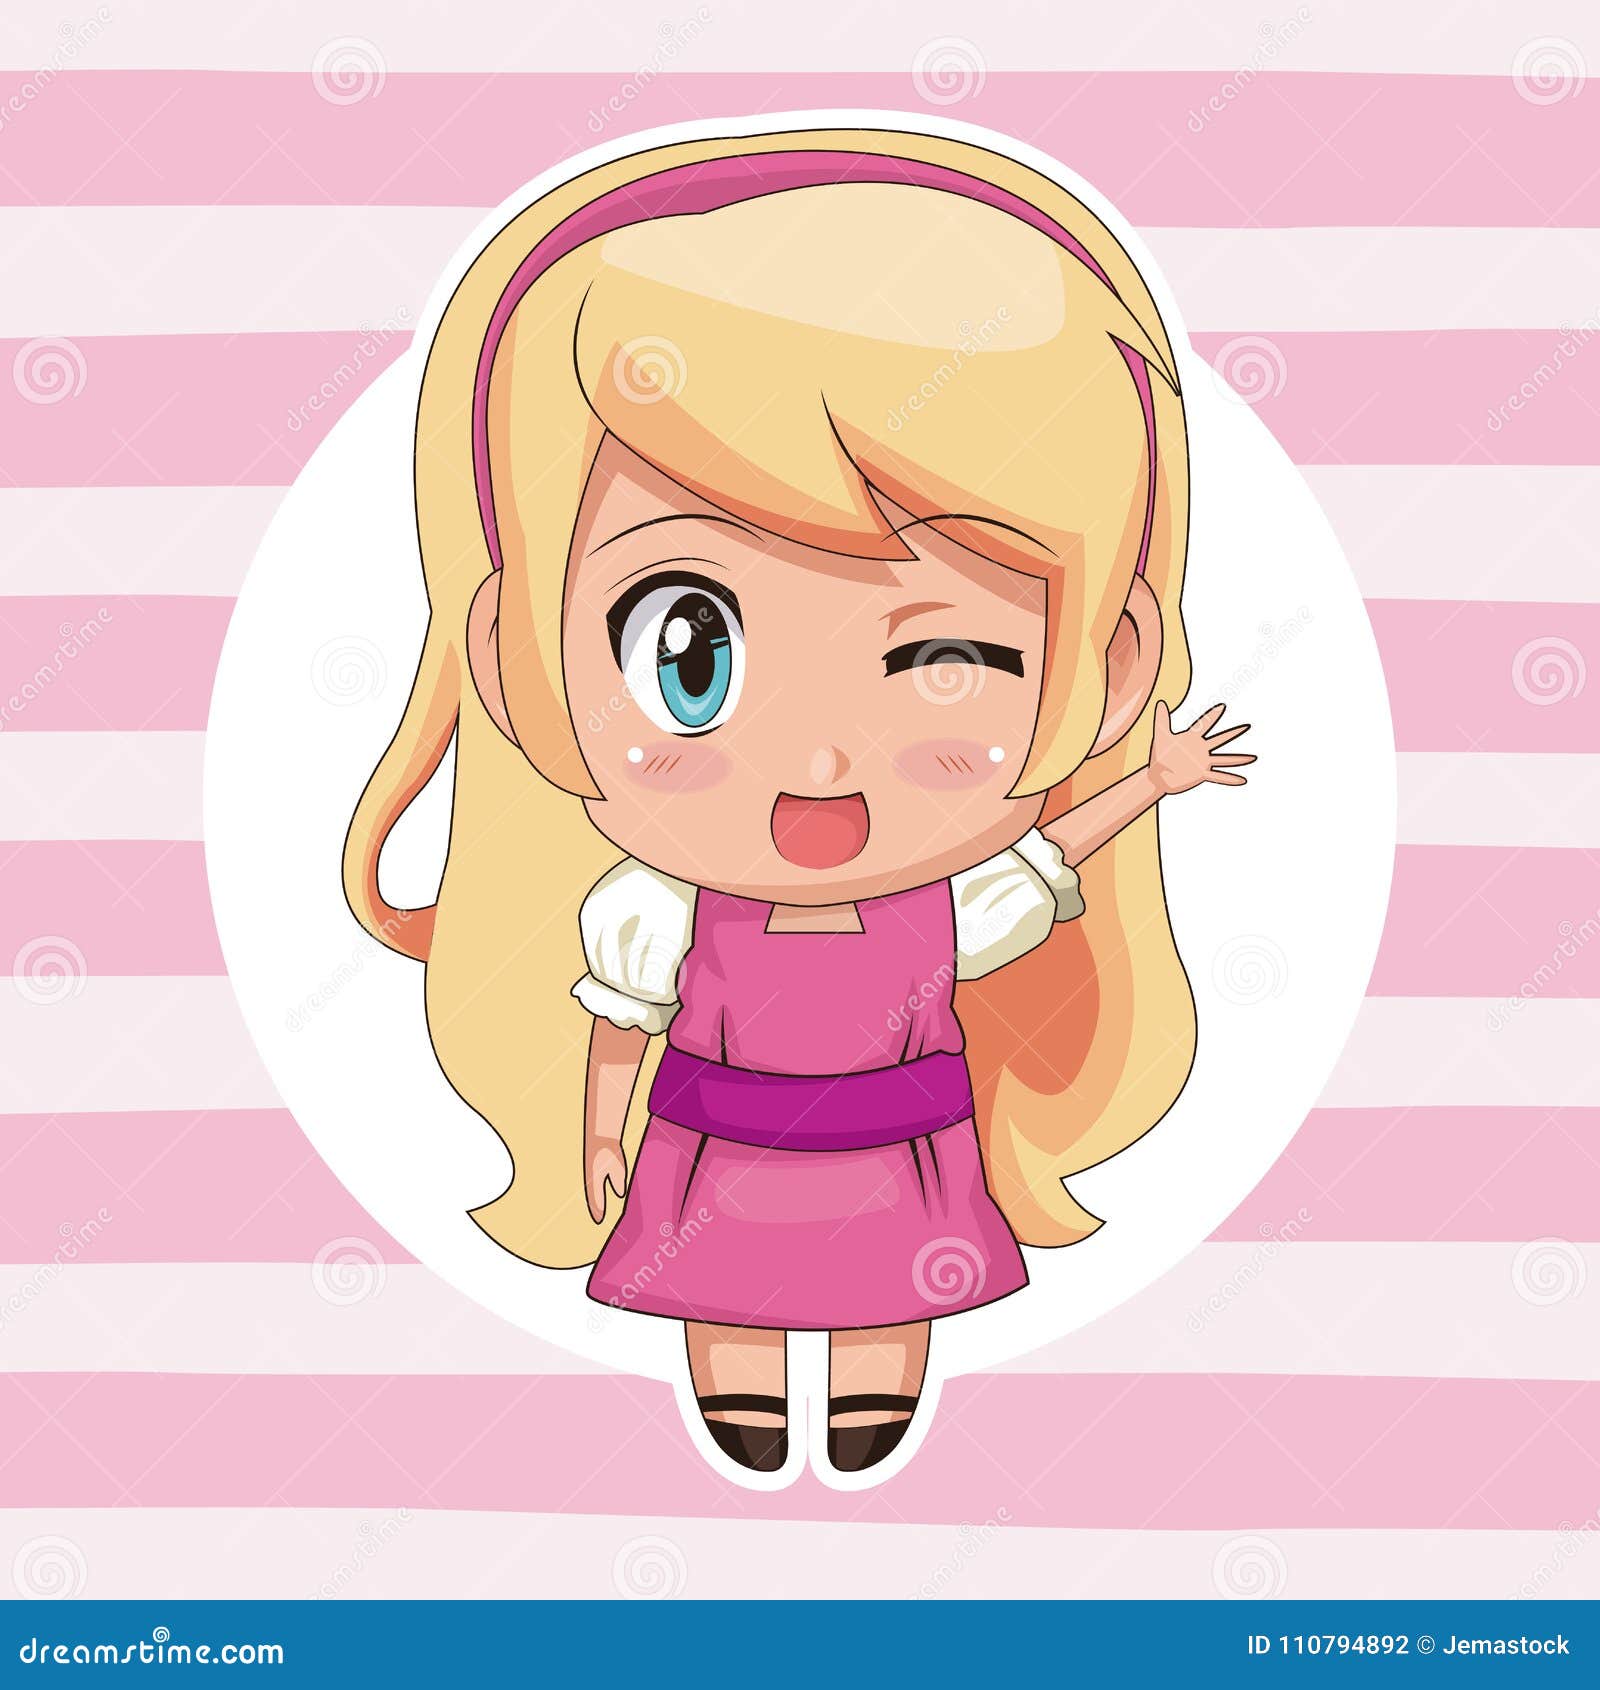 Pink Striped Color Background With Circular Frame And Cute Anime